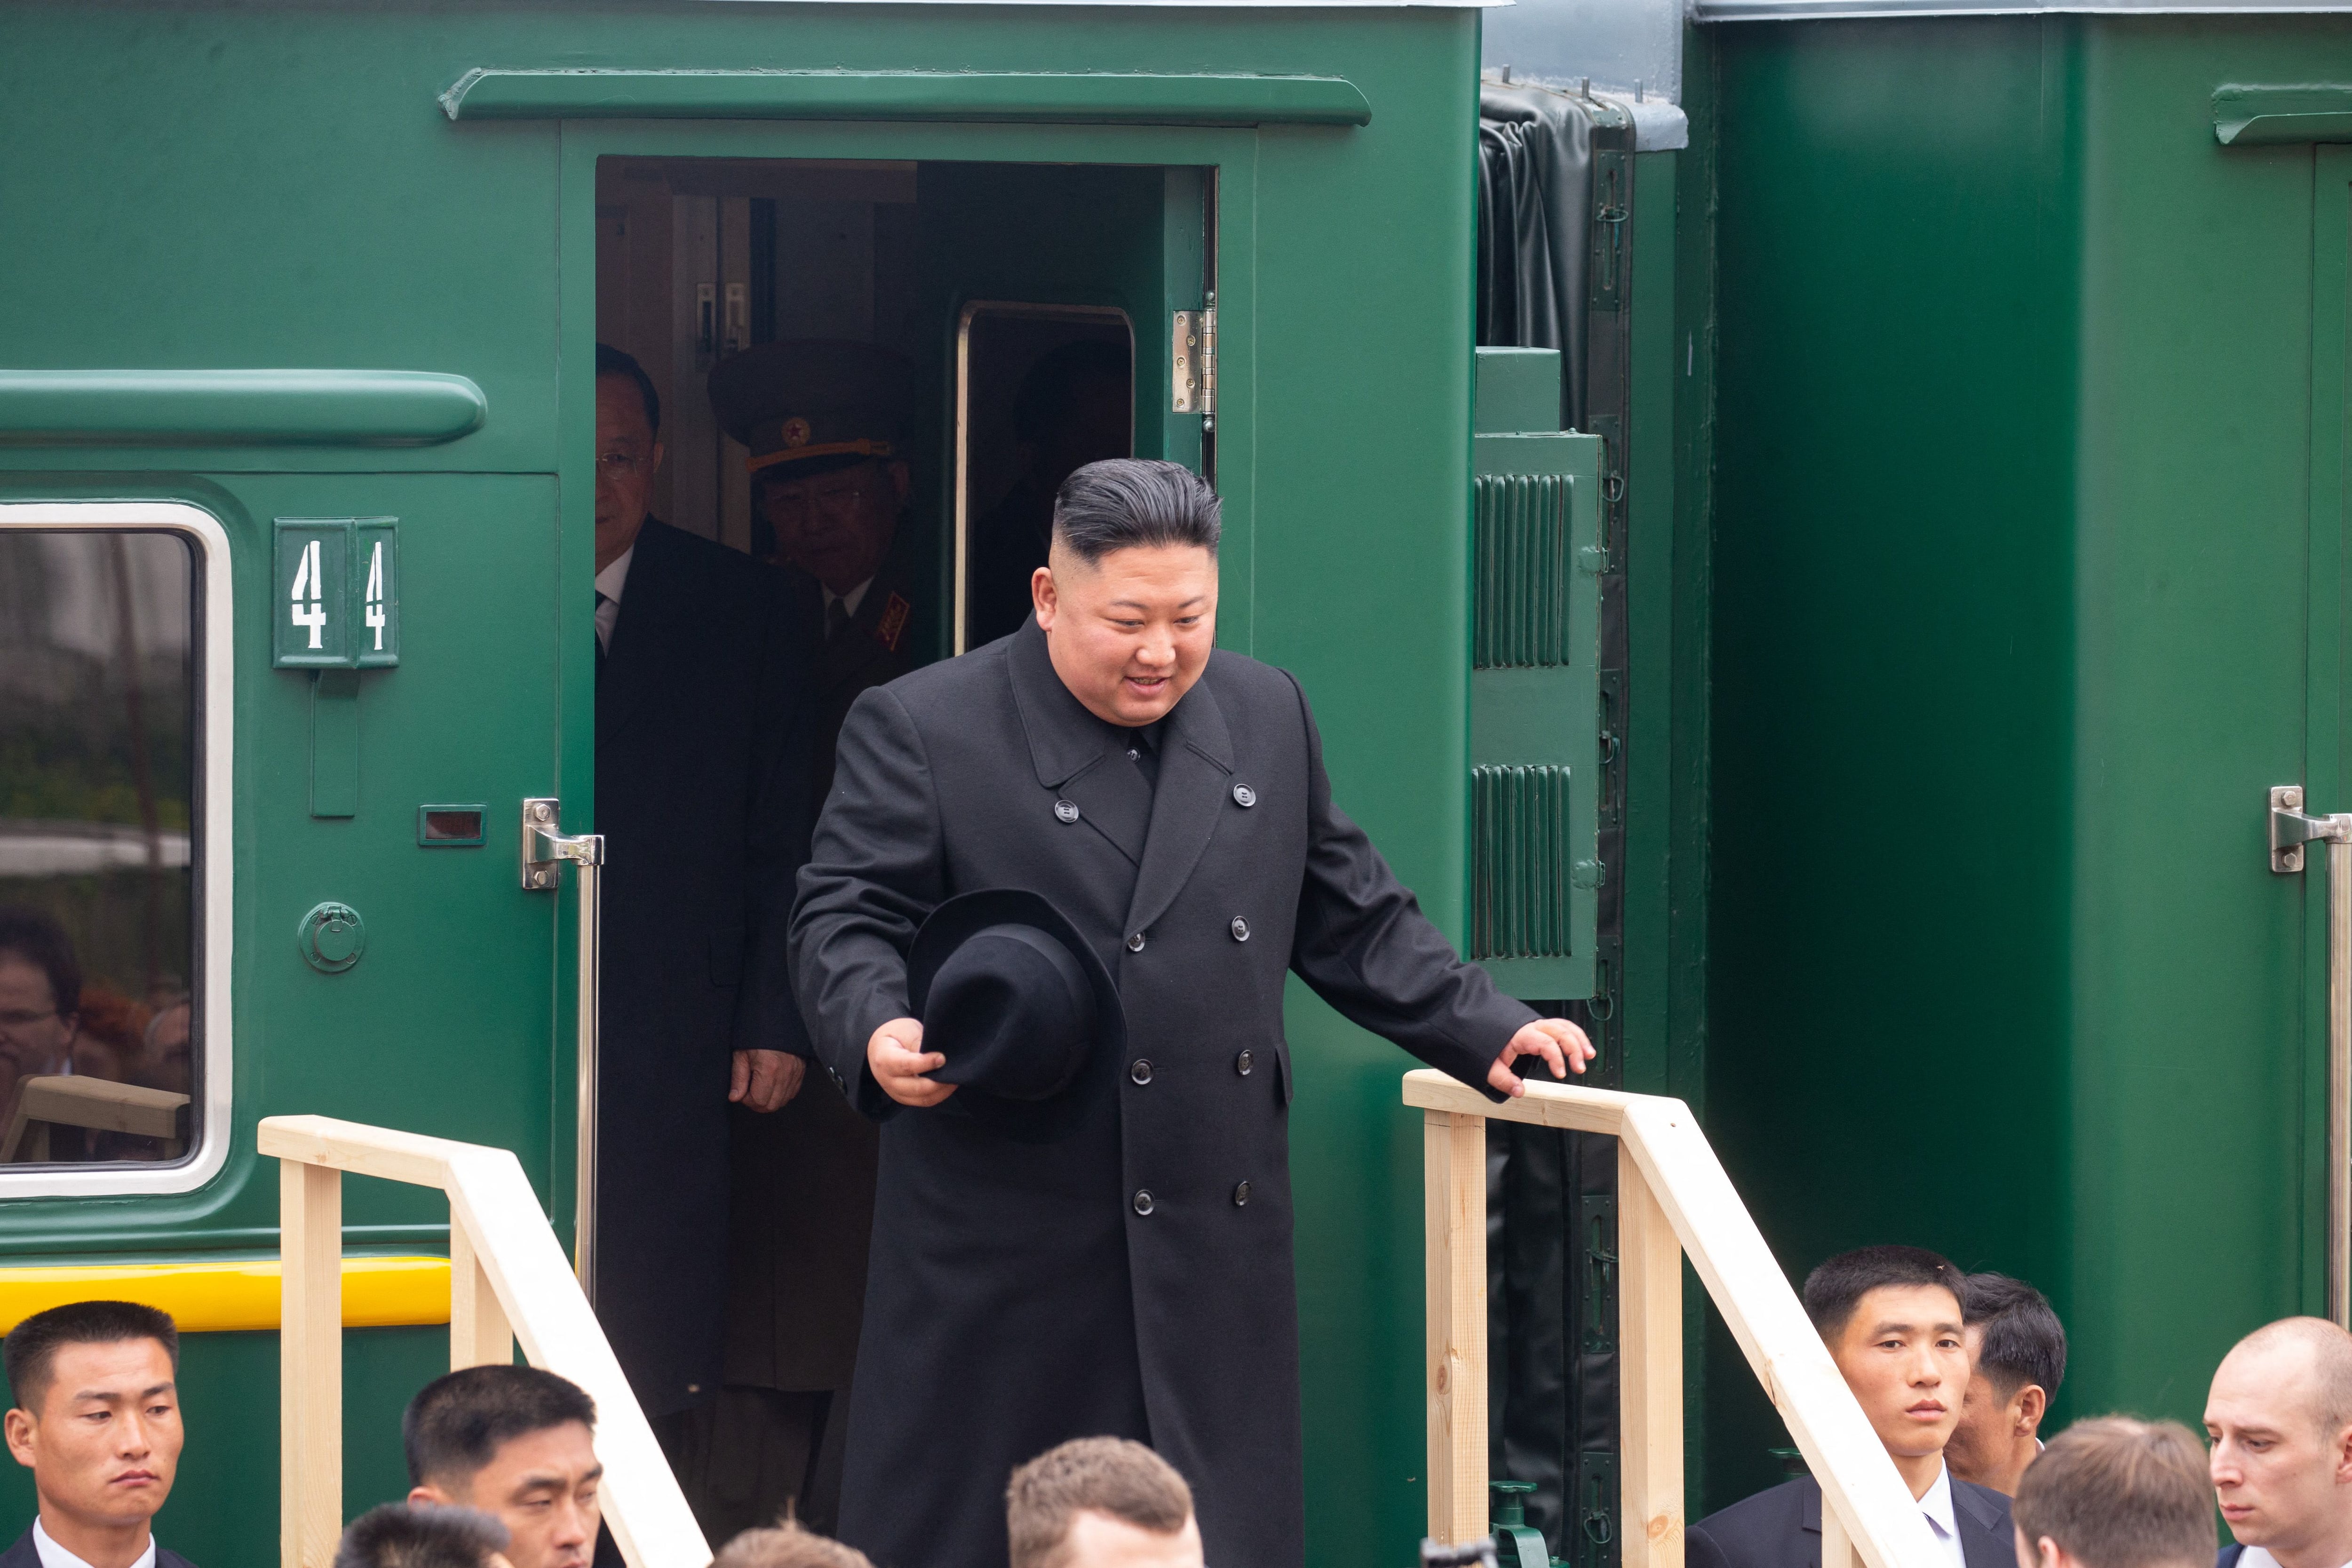 Kim Jong-un upon arrival at a station in the Russian border town of Khasan on April 24, 2019. (Photo by Alexander SAFRONOV / Primorsky Krai Administration Press Service / AFP).